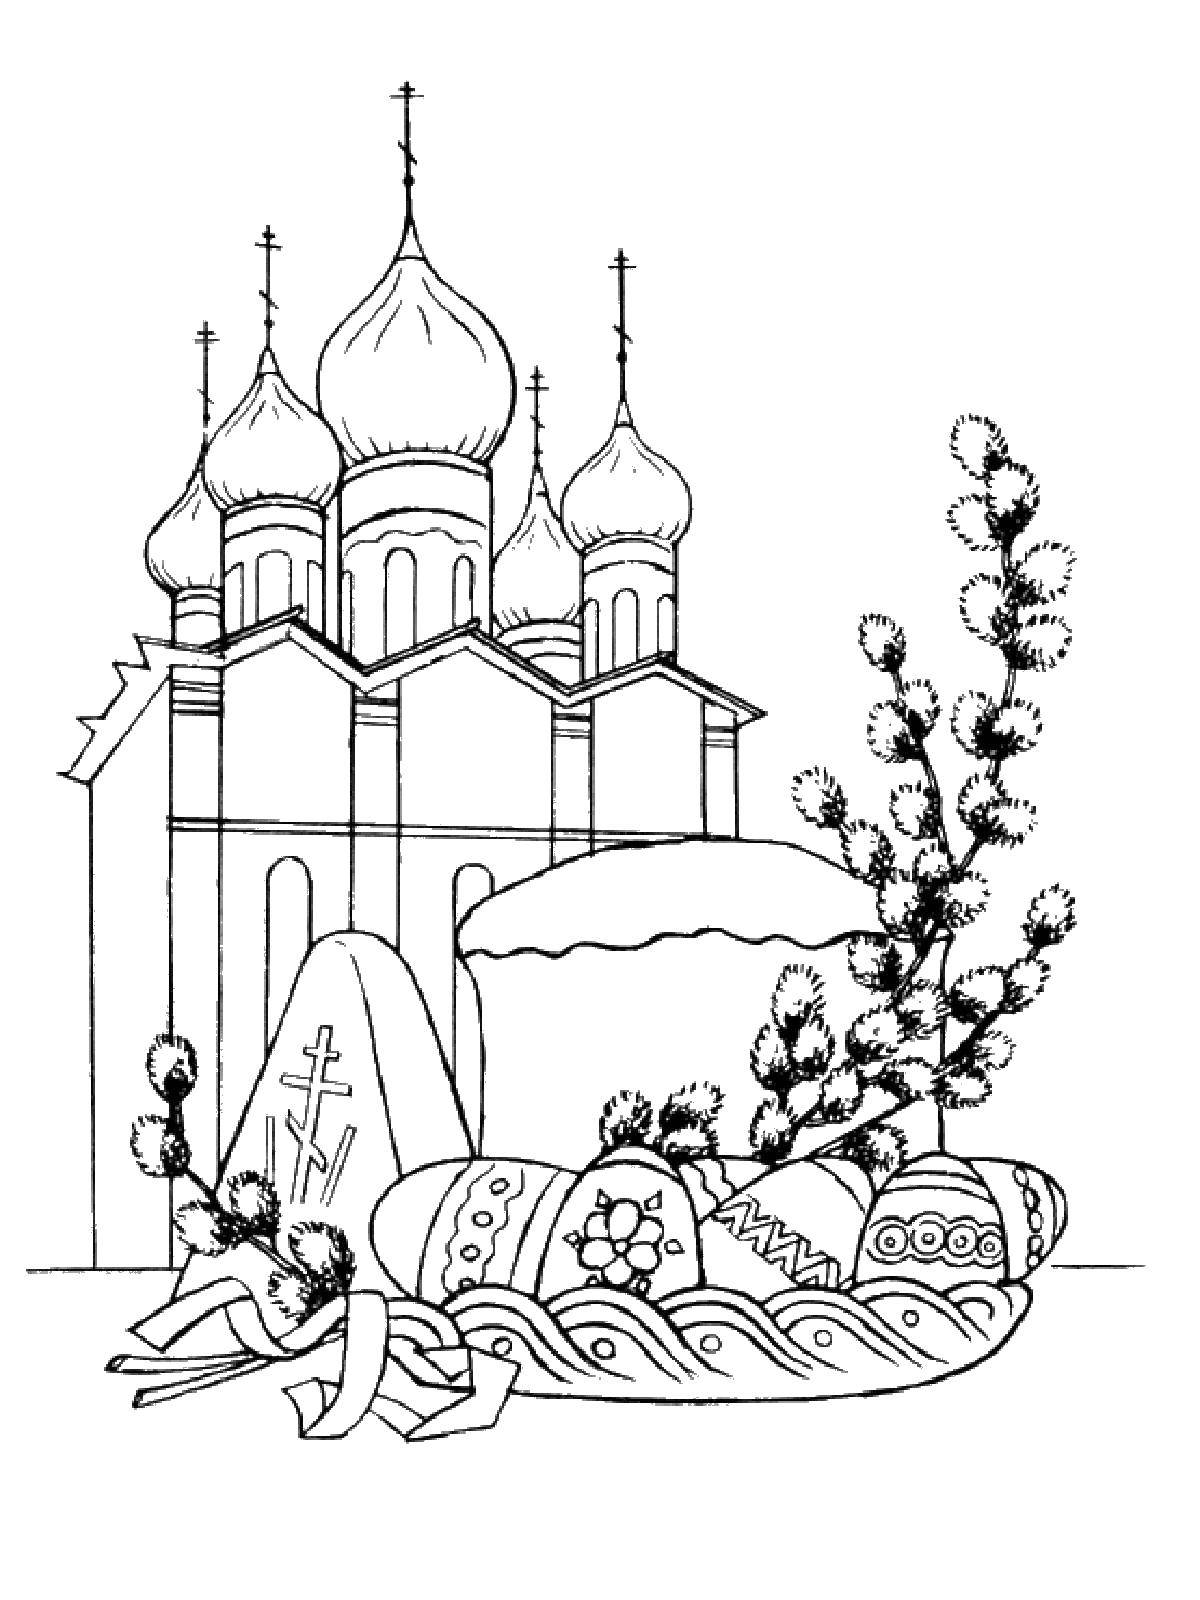 Coloring The Church and Easter eggs. Category coloring Easter. Tags:  Church, Easter eggs.